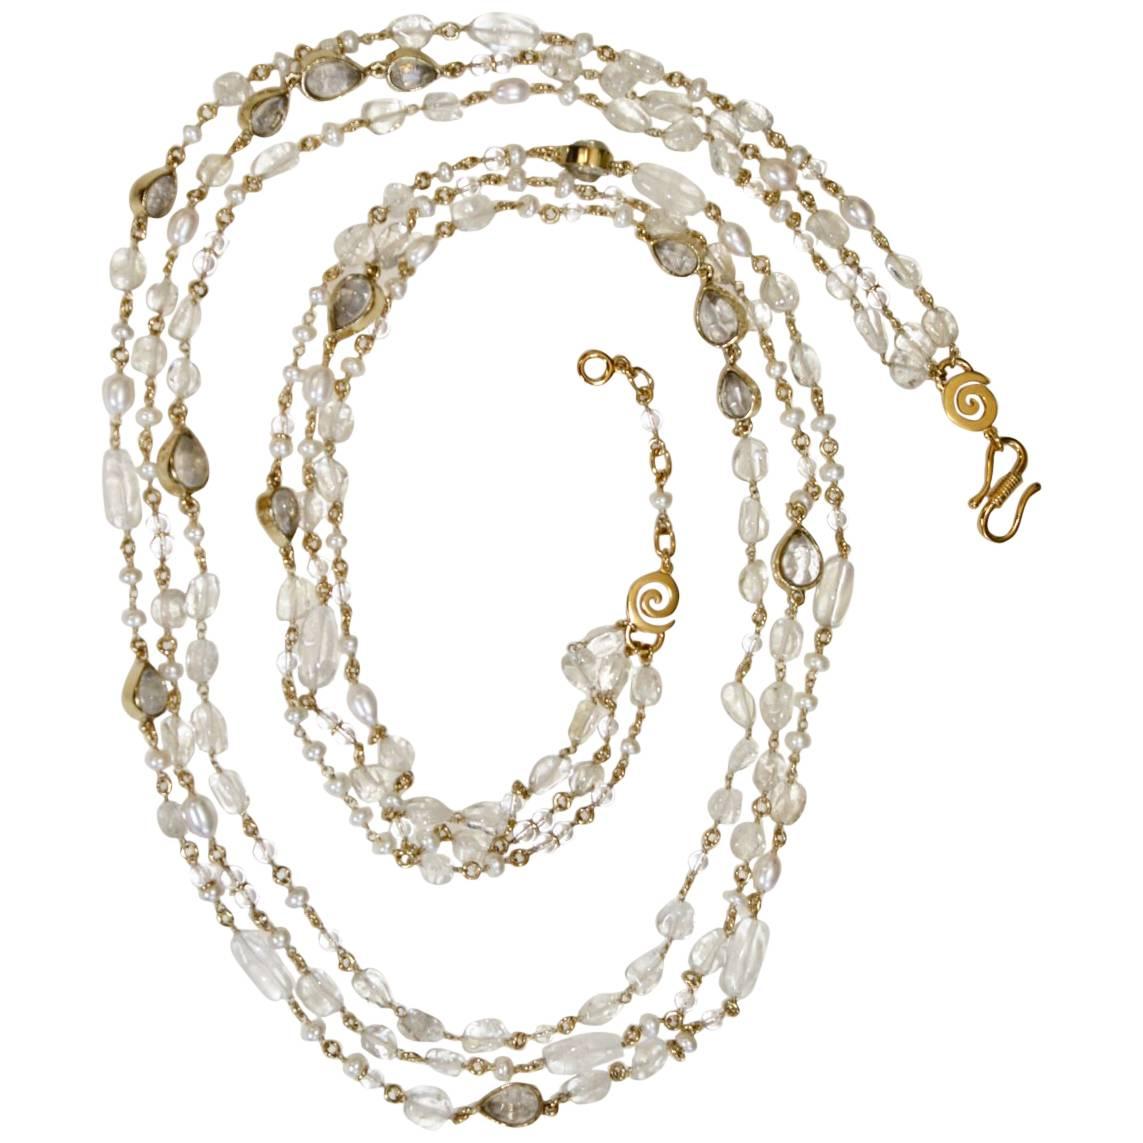 Goossens Paris Nepal Triple Long Necklace in Rock Crystal and Pearl